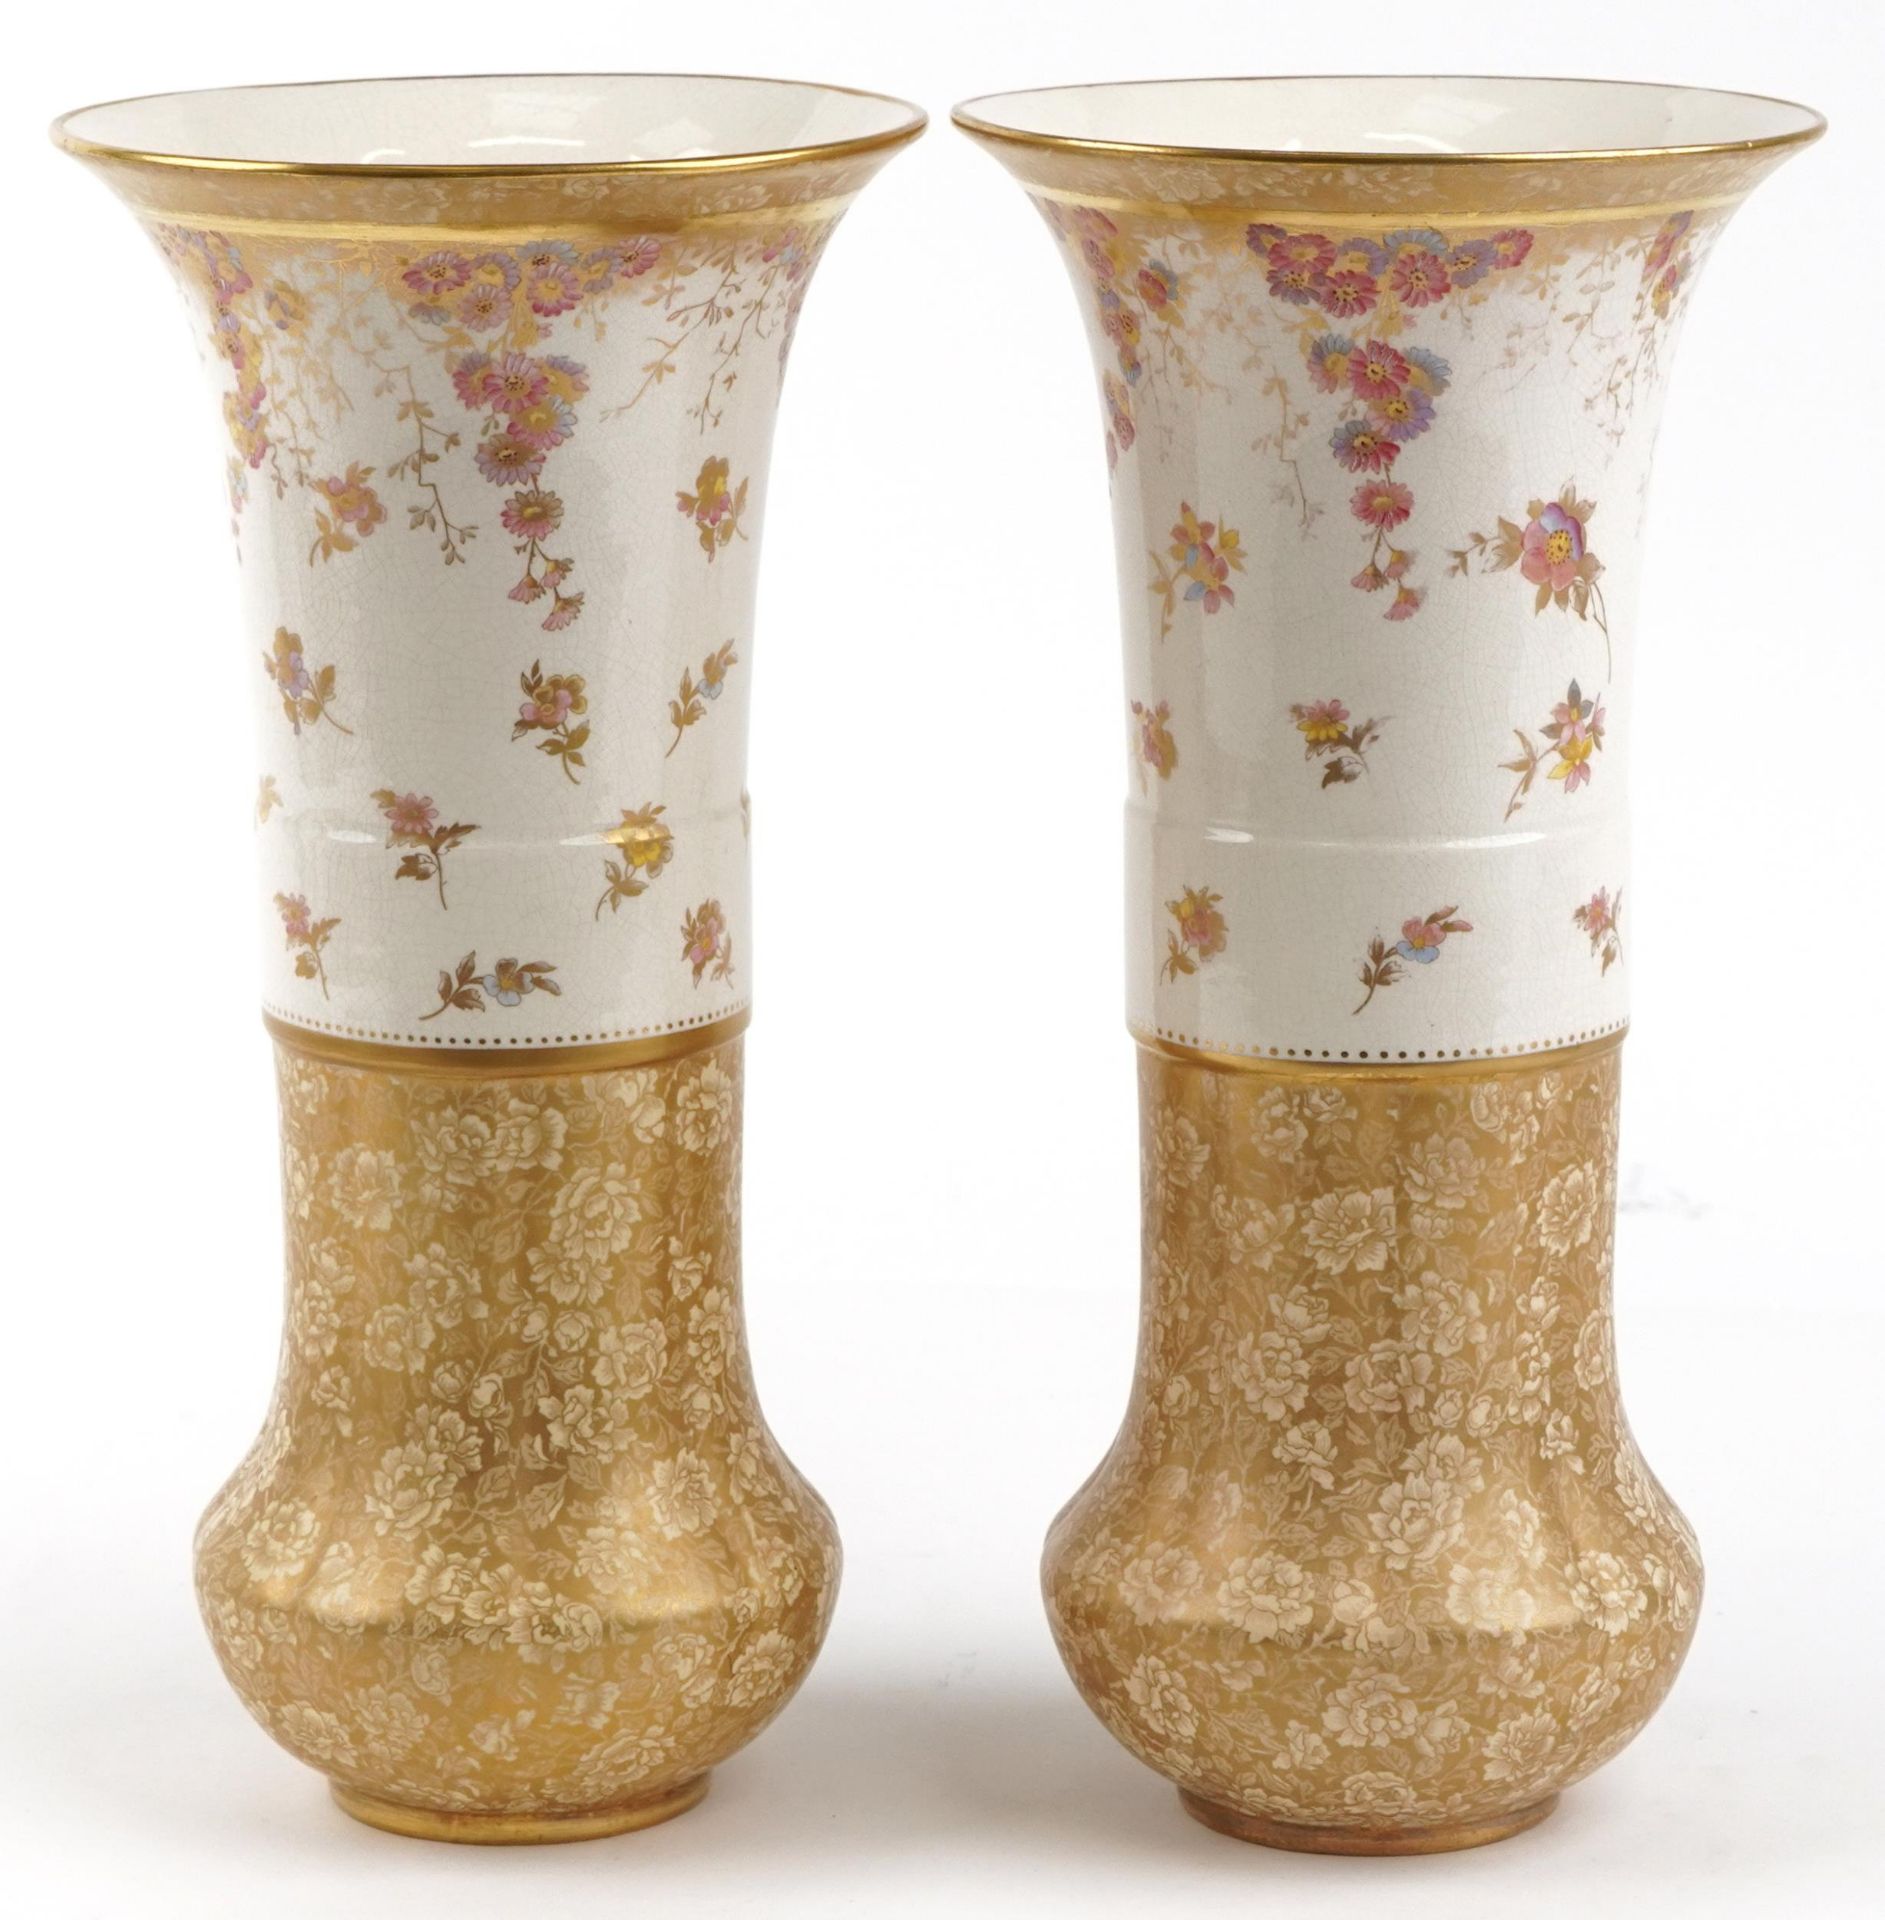 Wedgwood, large pair of aesthetic vases gilded and decorated with flowers, factory marks and